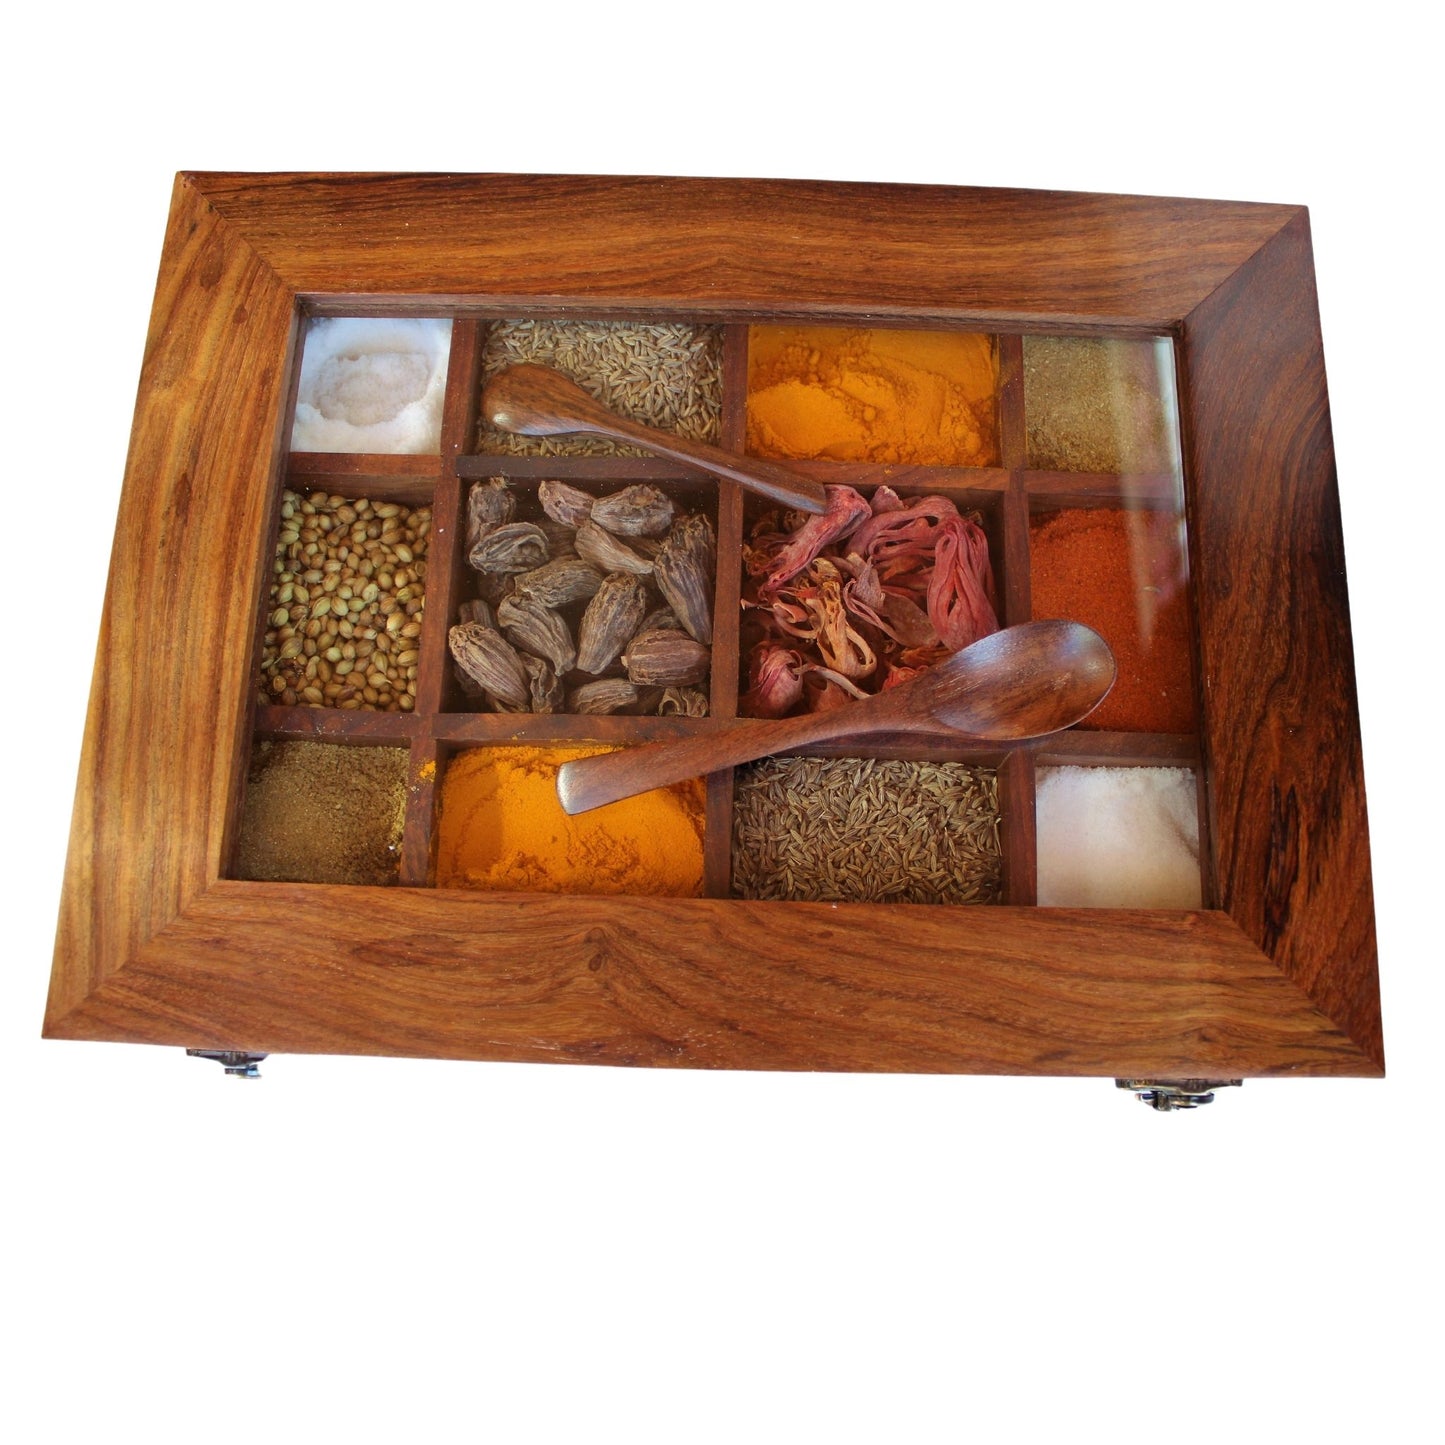 https://anayras.com/cdn/shop/products/SheeshamWoodHandcraftedSpiceBoxHerbBoxLargewith12Partitions_8.jpg?v=1653807143&width=1445